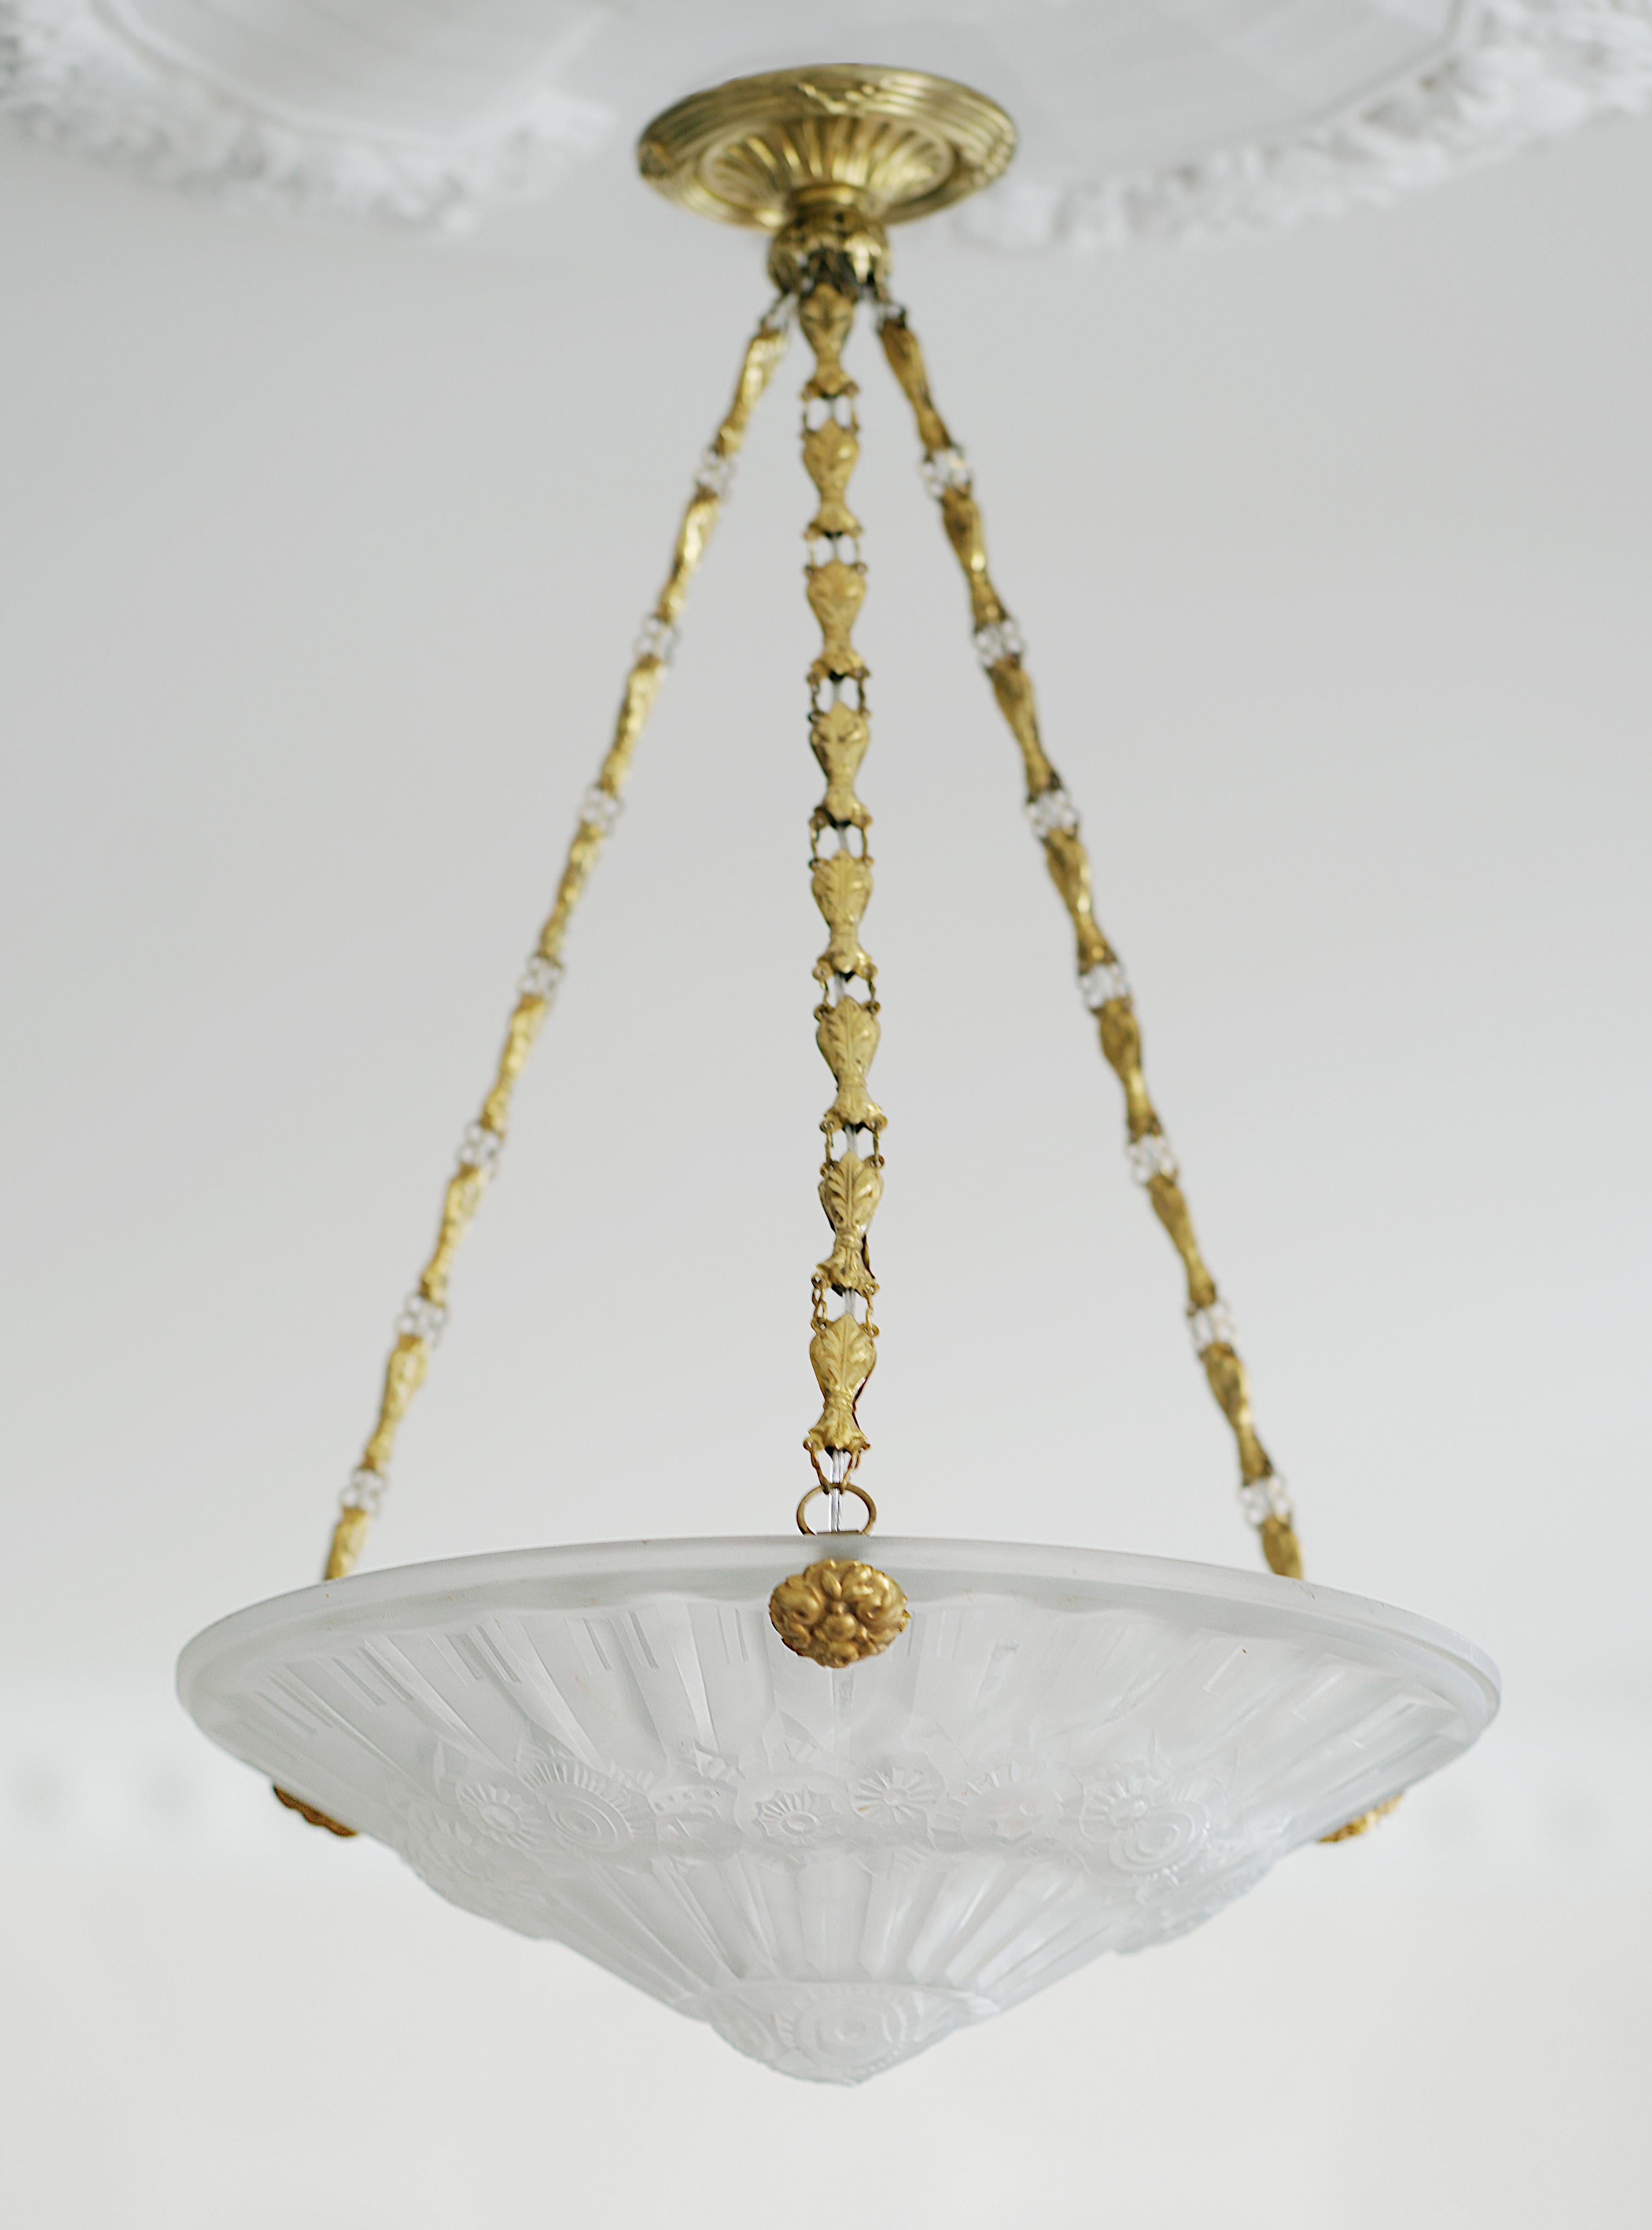 Brass Jean Gauthier French Art Deco Pendant Chandelier, Late 1920s For Sale